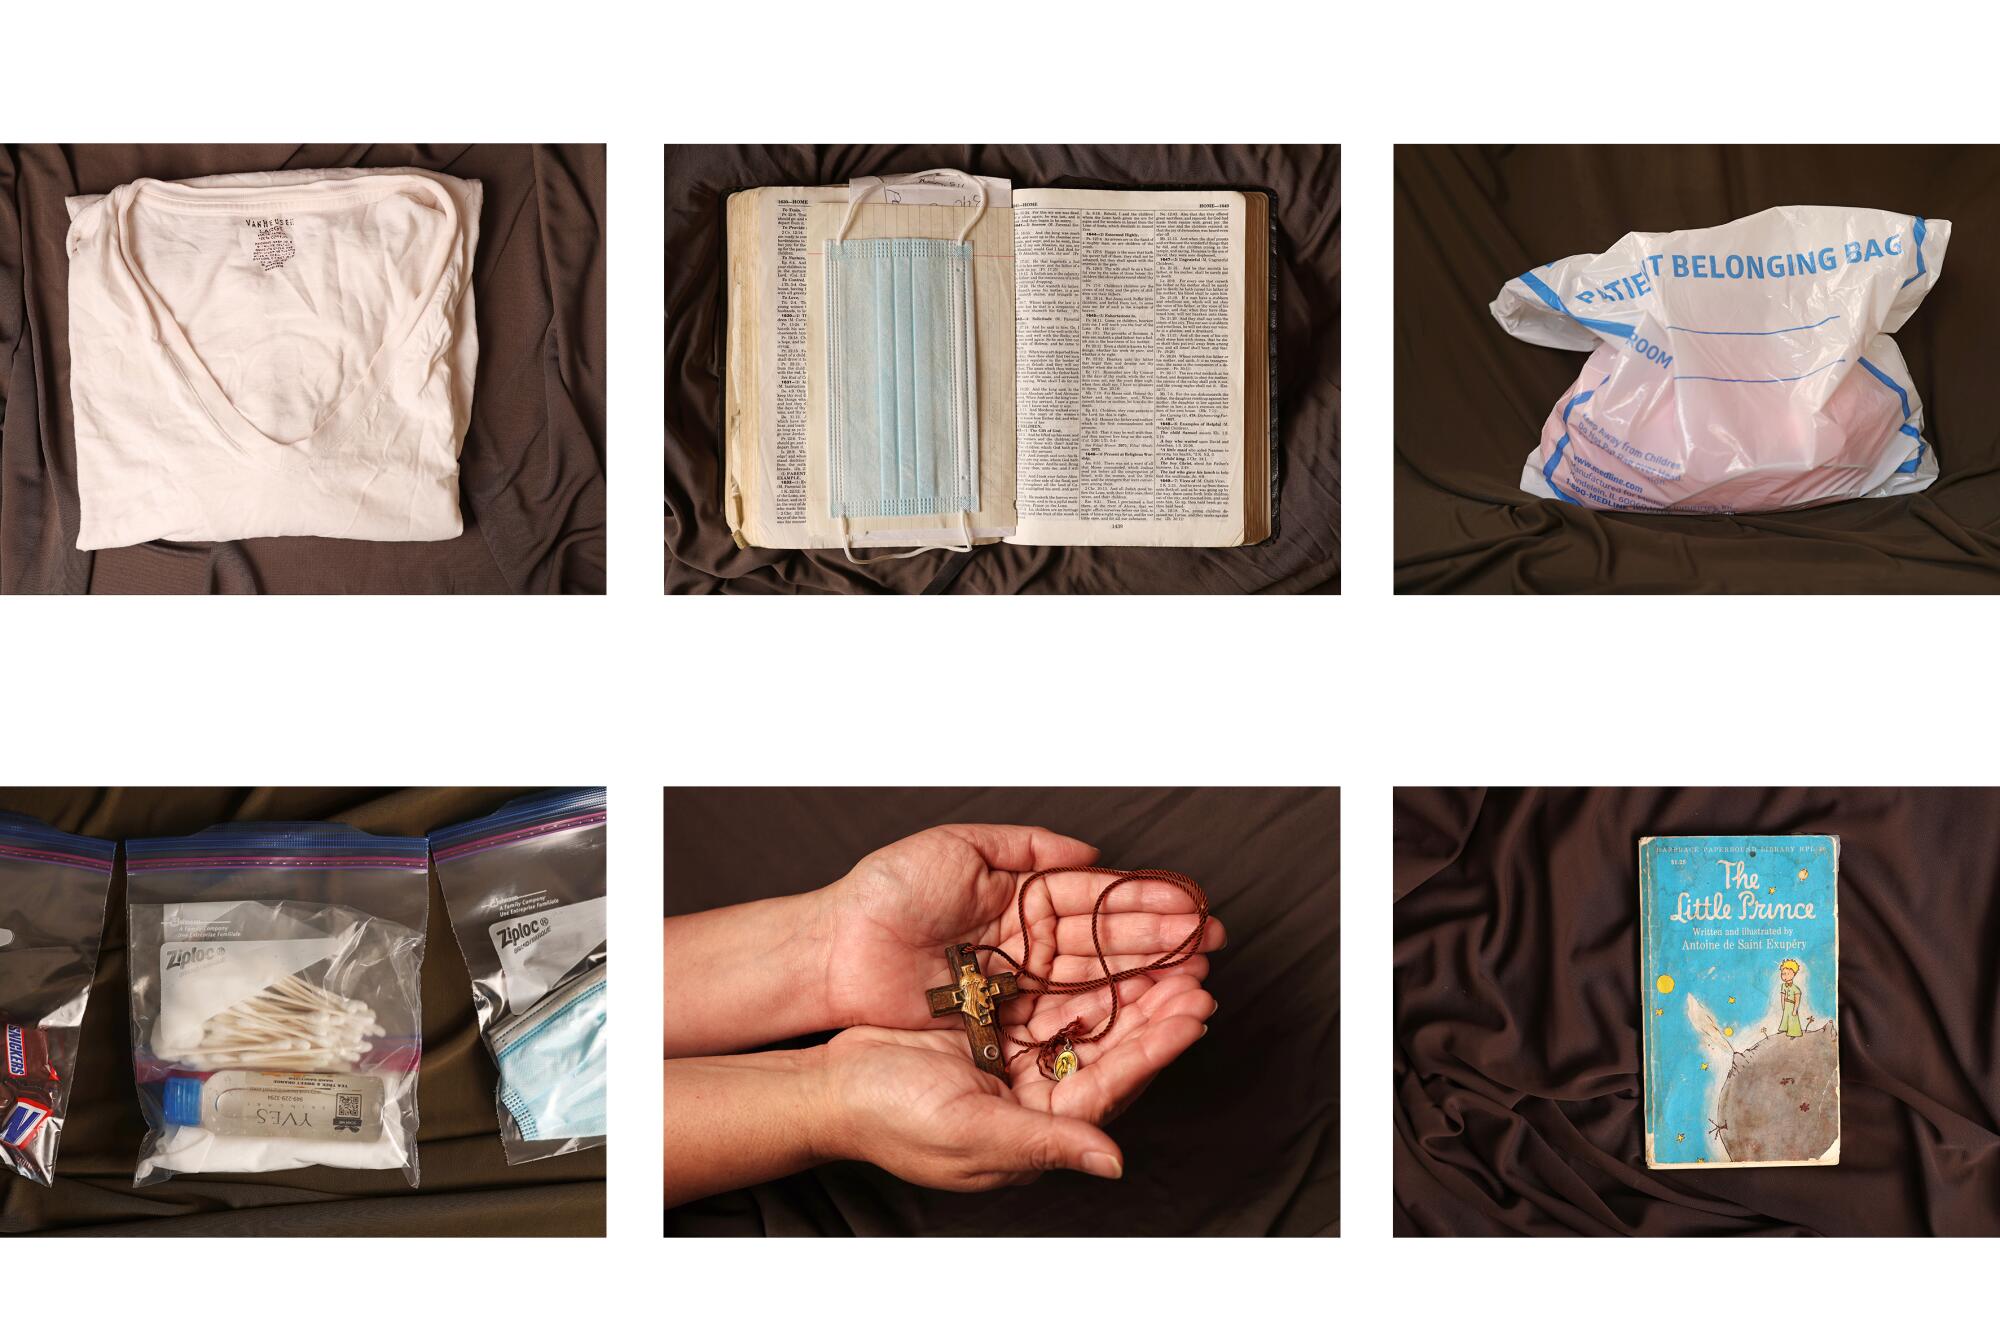 Six photos: a white T-shirt, a Bible, a plastic bag, Ziplocs with candy and toiletries, a cross, and The Little Prince book